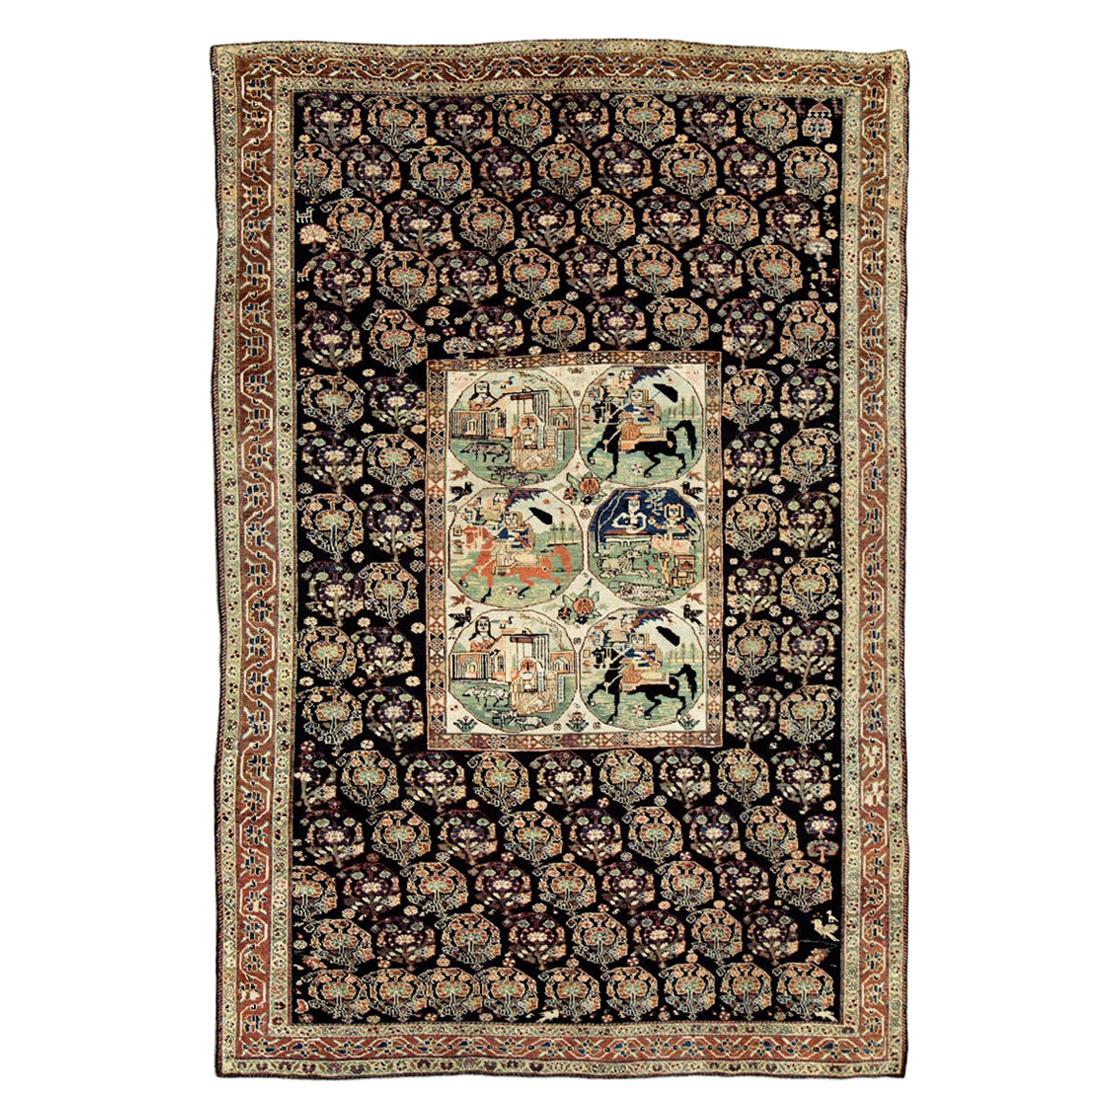 Early 20th Century Handmade Persian Tribal Pictorial Story Accent Rug